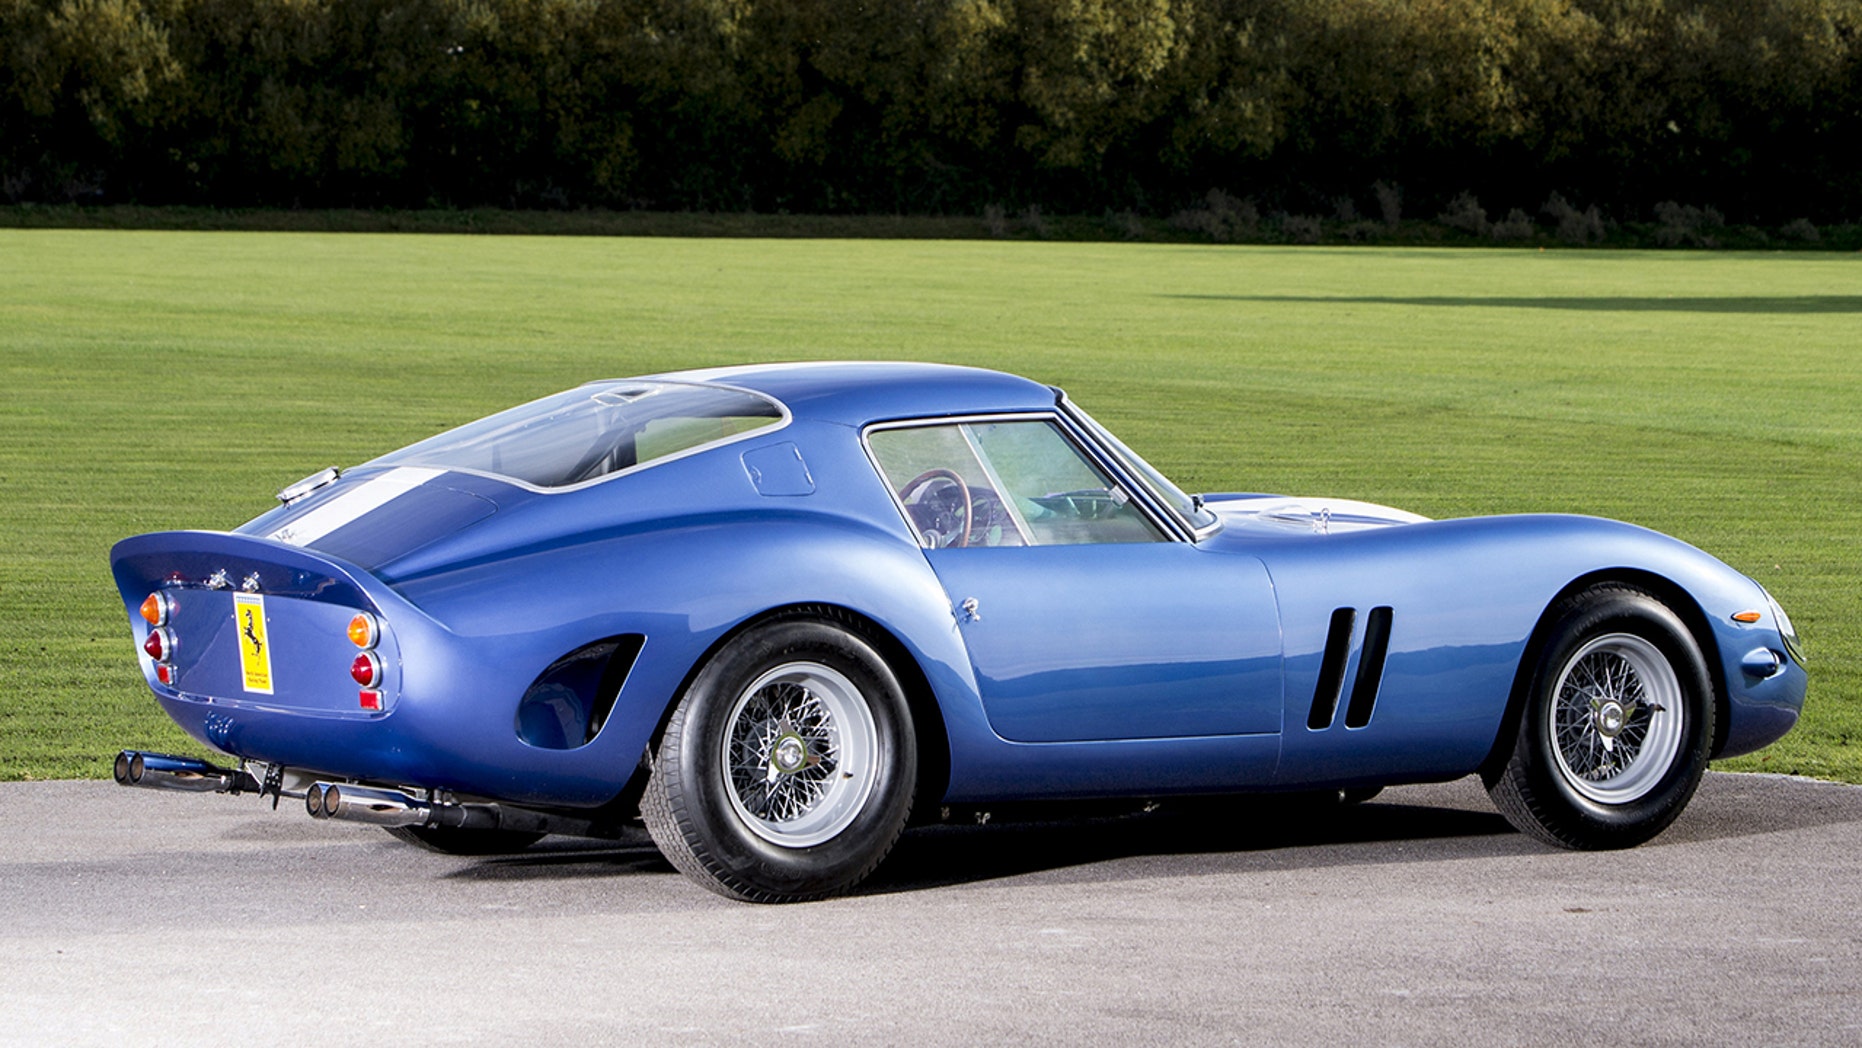 A $44M 1962 Ferrari 250 GTO is missing a part, according to Lawsuit